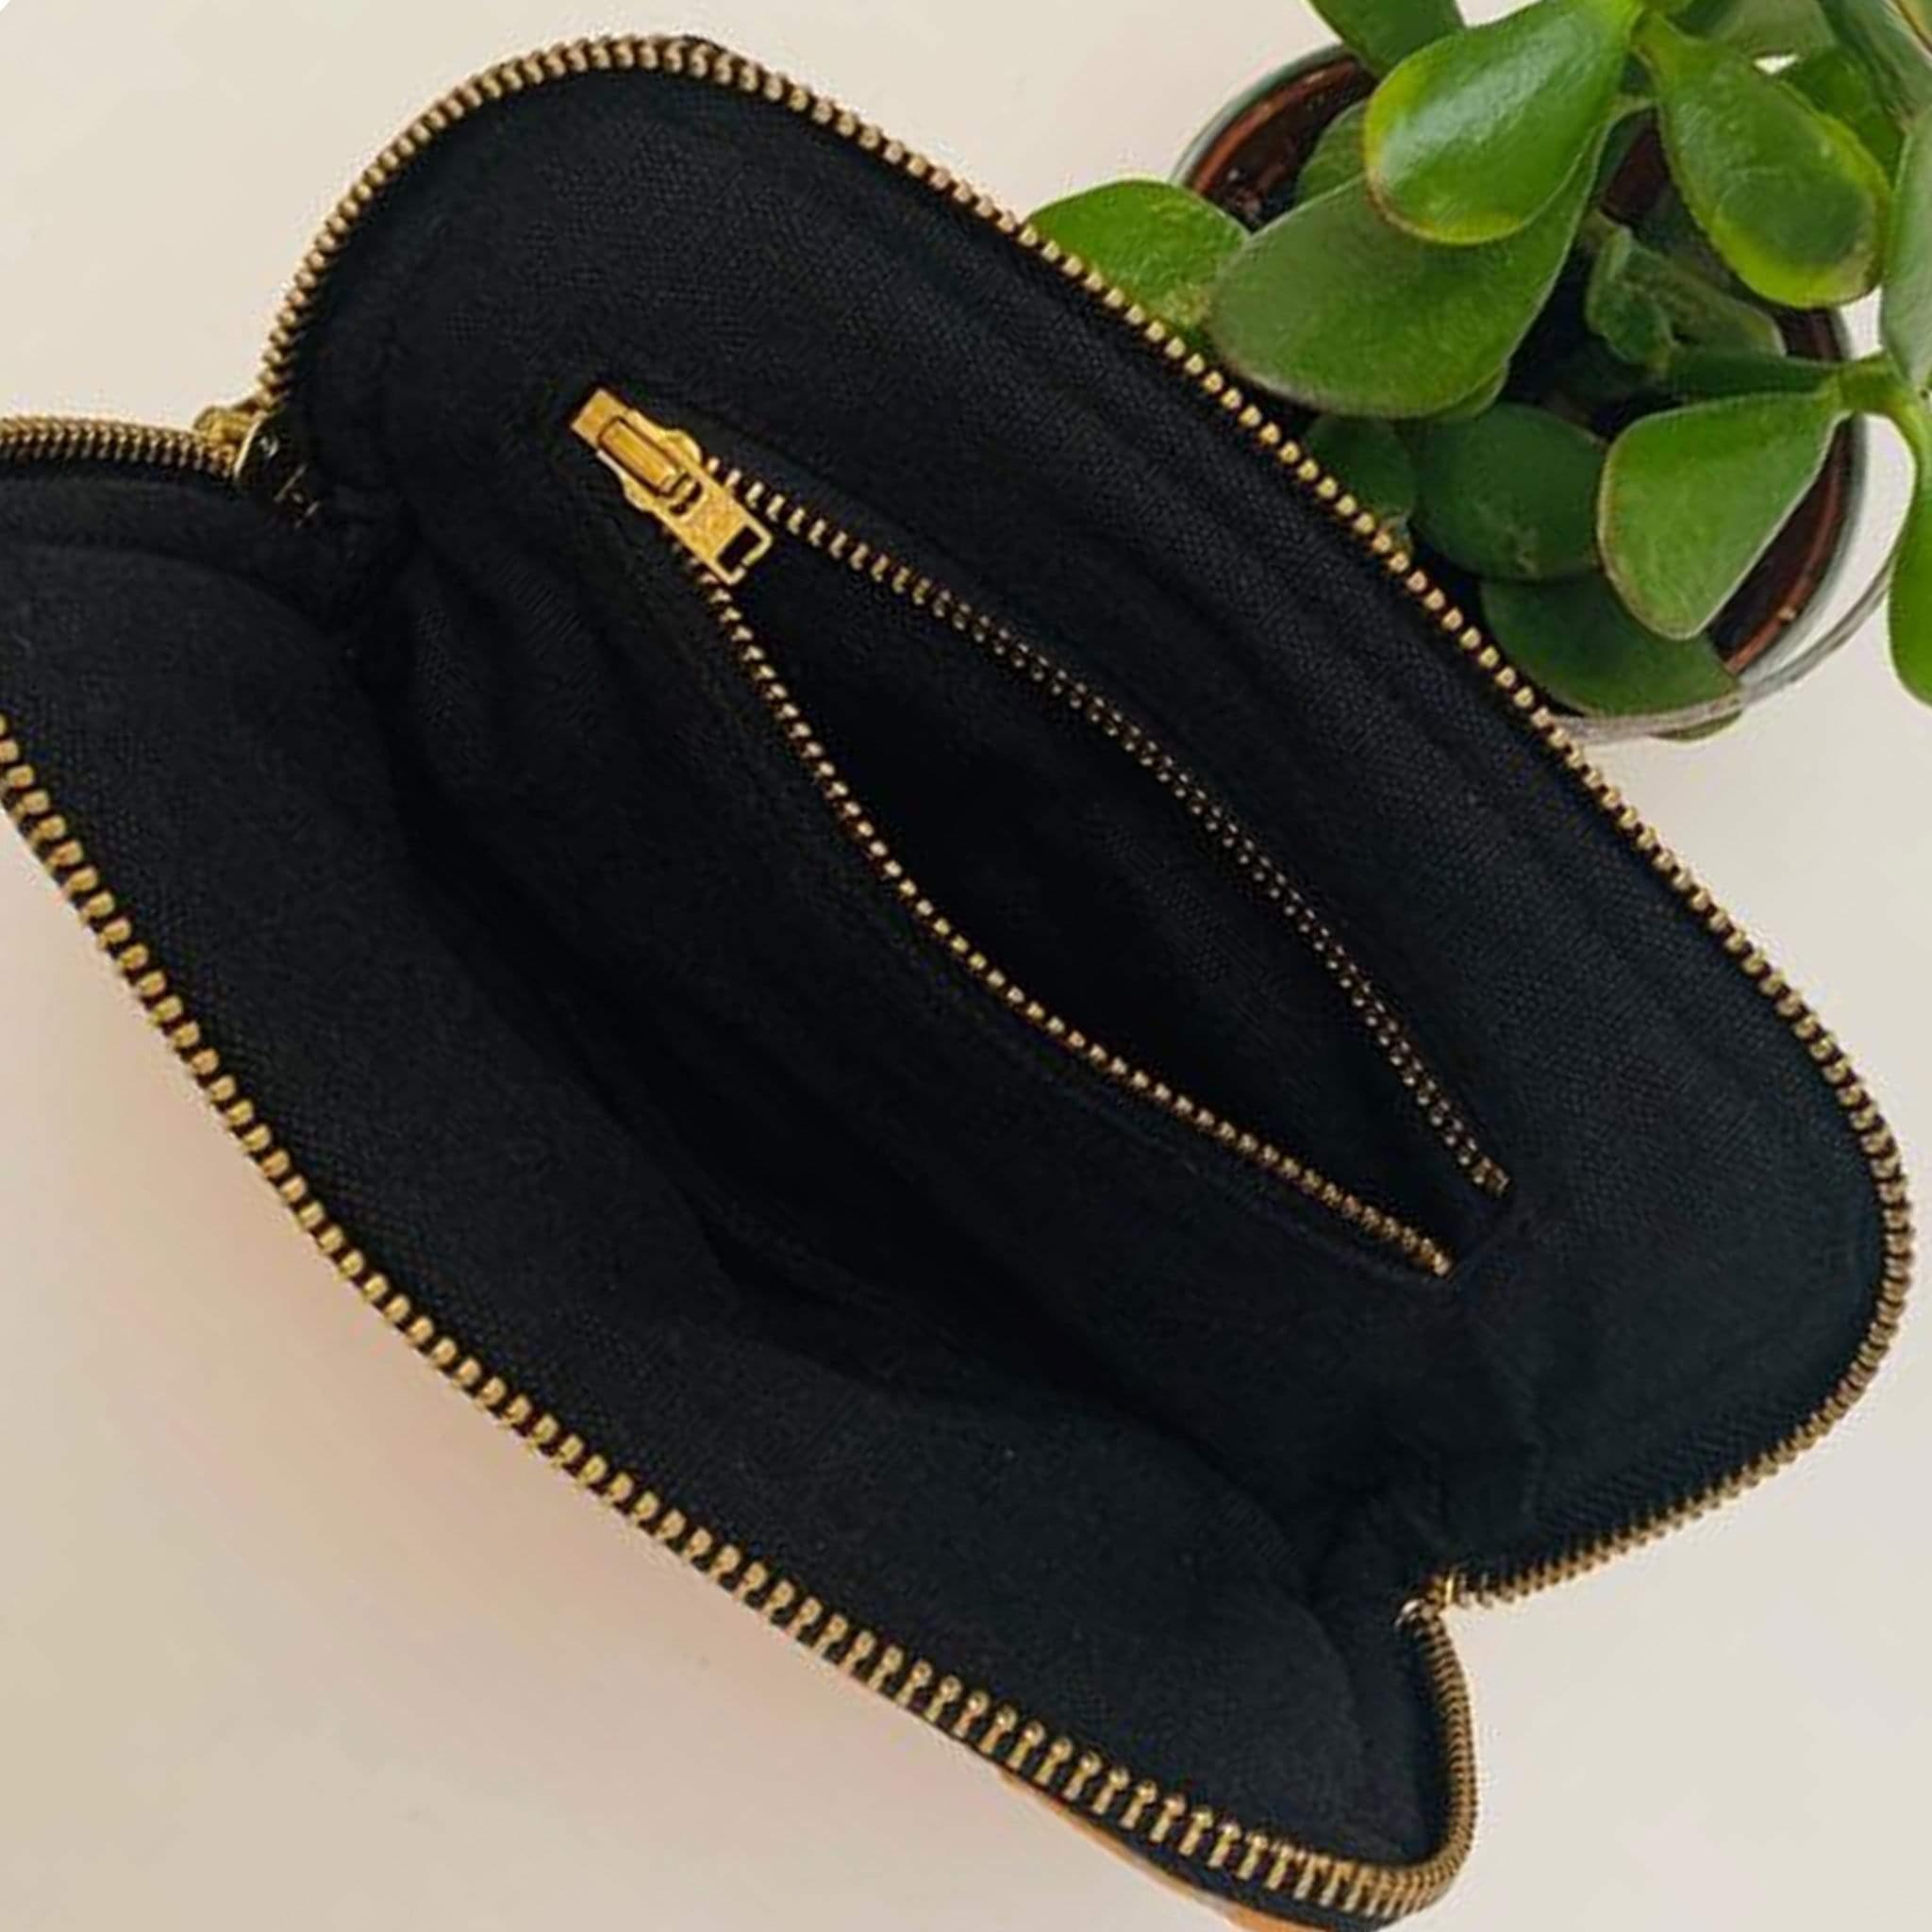 Premium Recycled Silk Make - up Bag (One - Off Print) + Scrunchie + Sleep Mask - Ammpoure Wellbeing